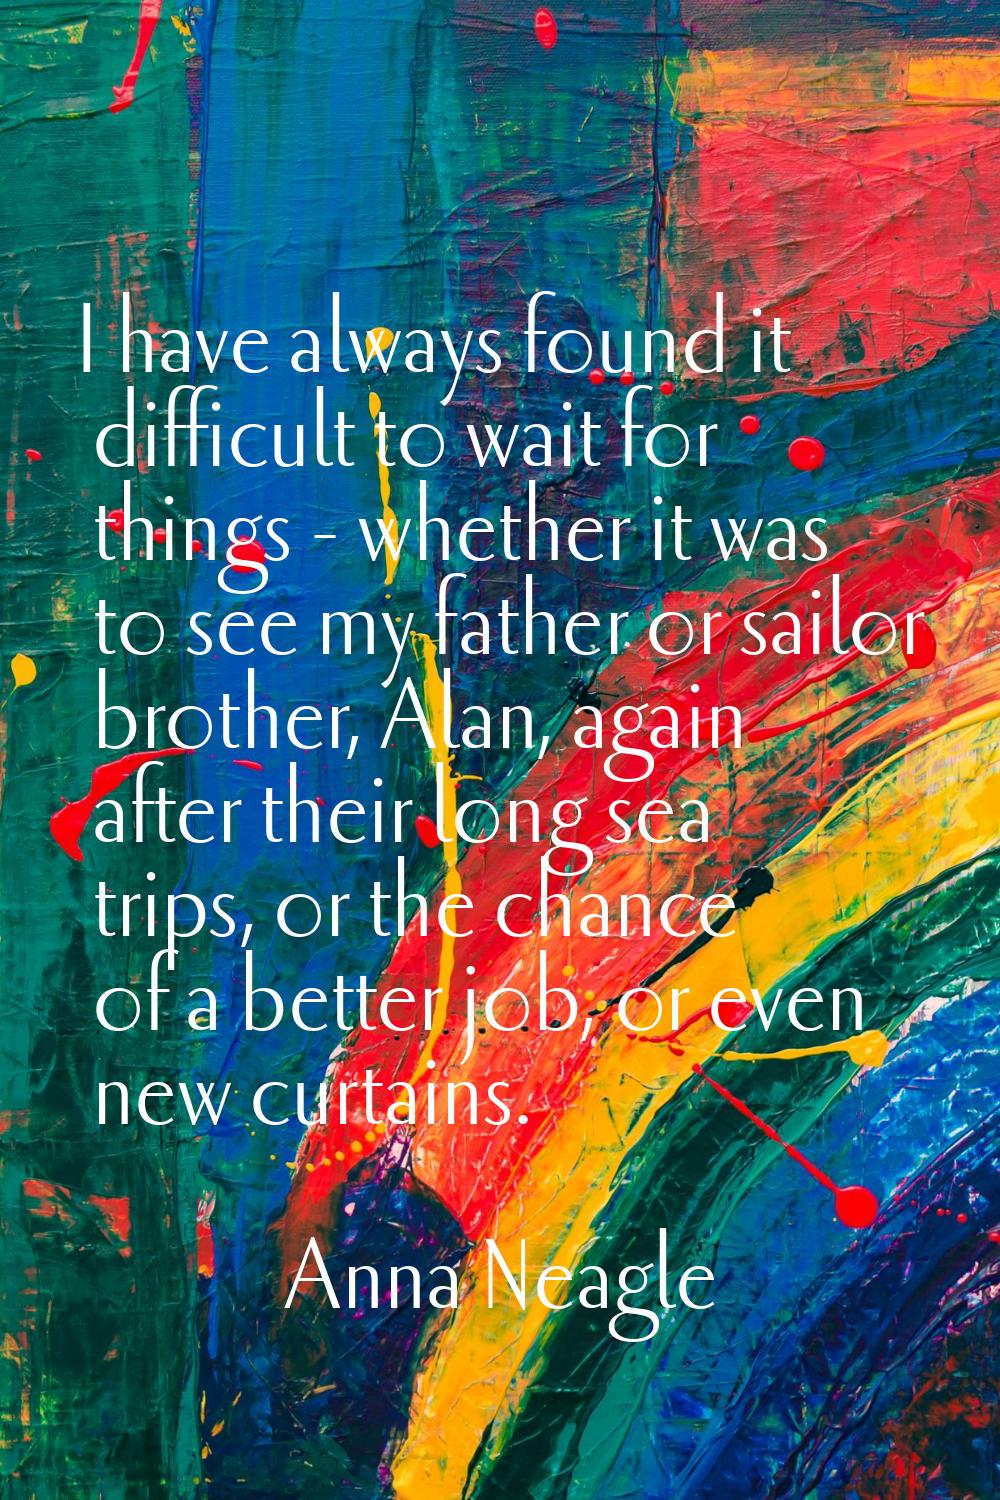 I have always found it difficult to wait for things - whether it was to see my father or sailor bro